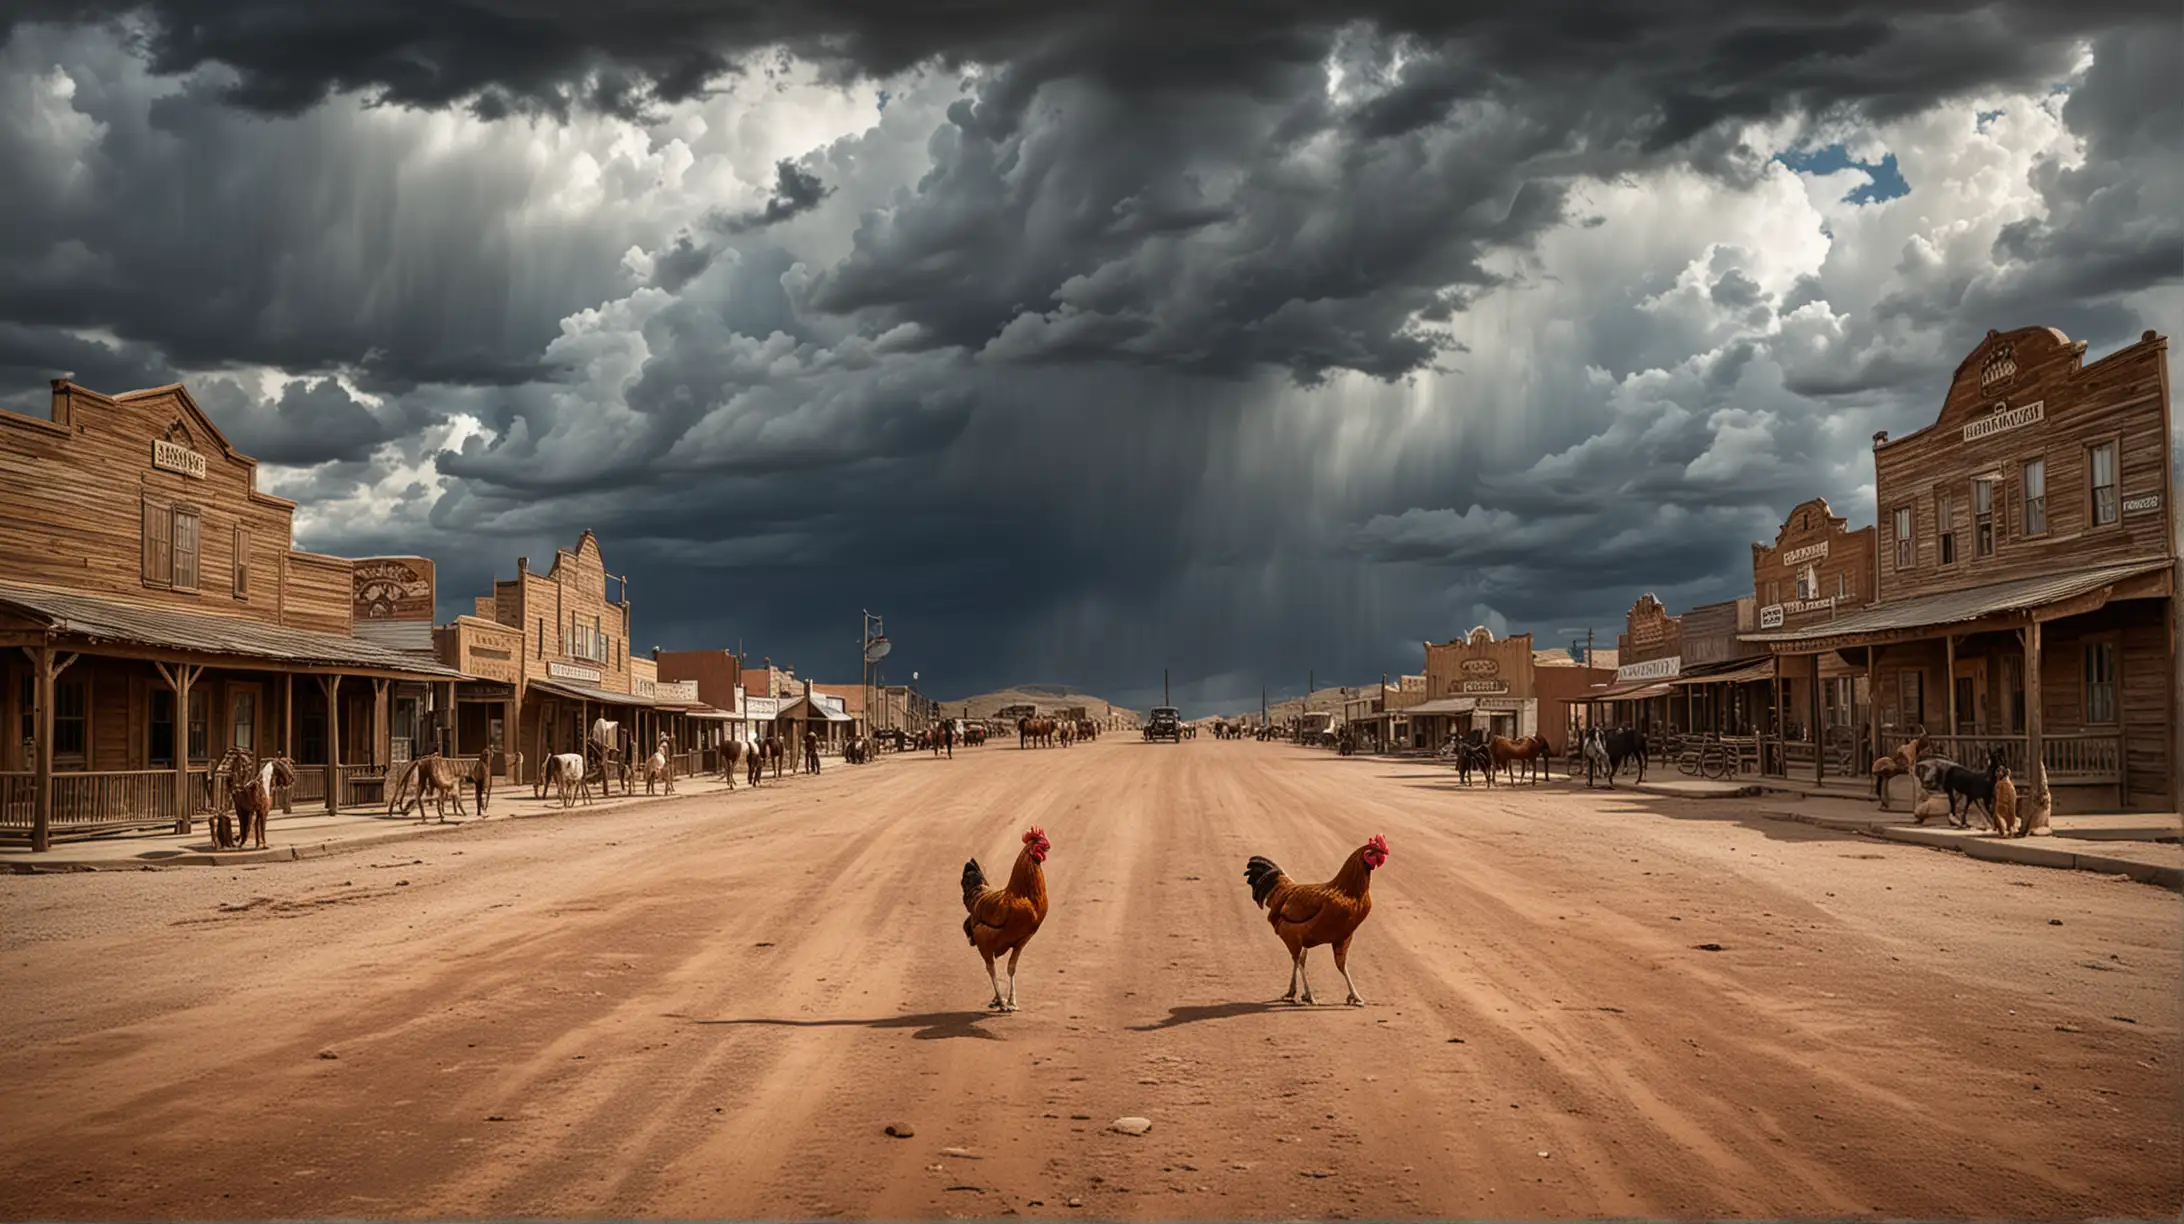 chicken crossing the road, old western town, horses, dramatic sky.